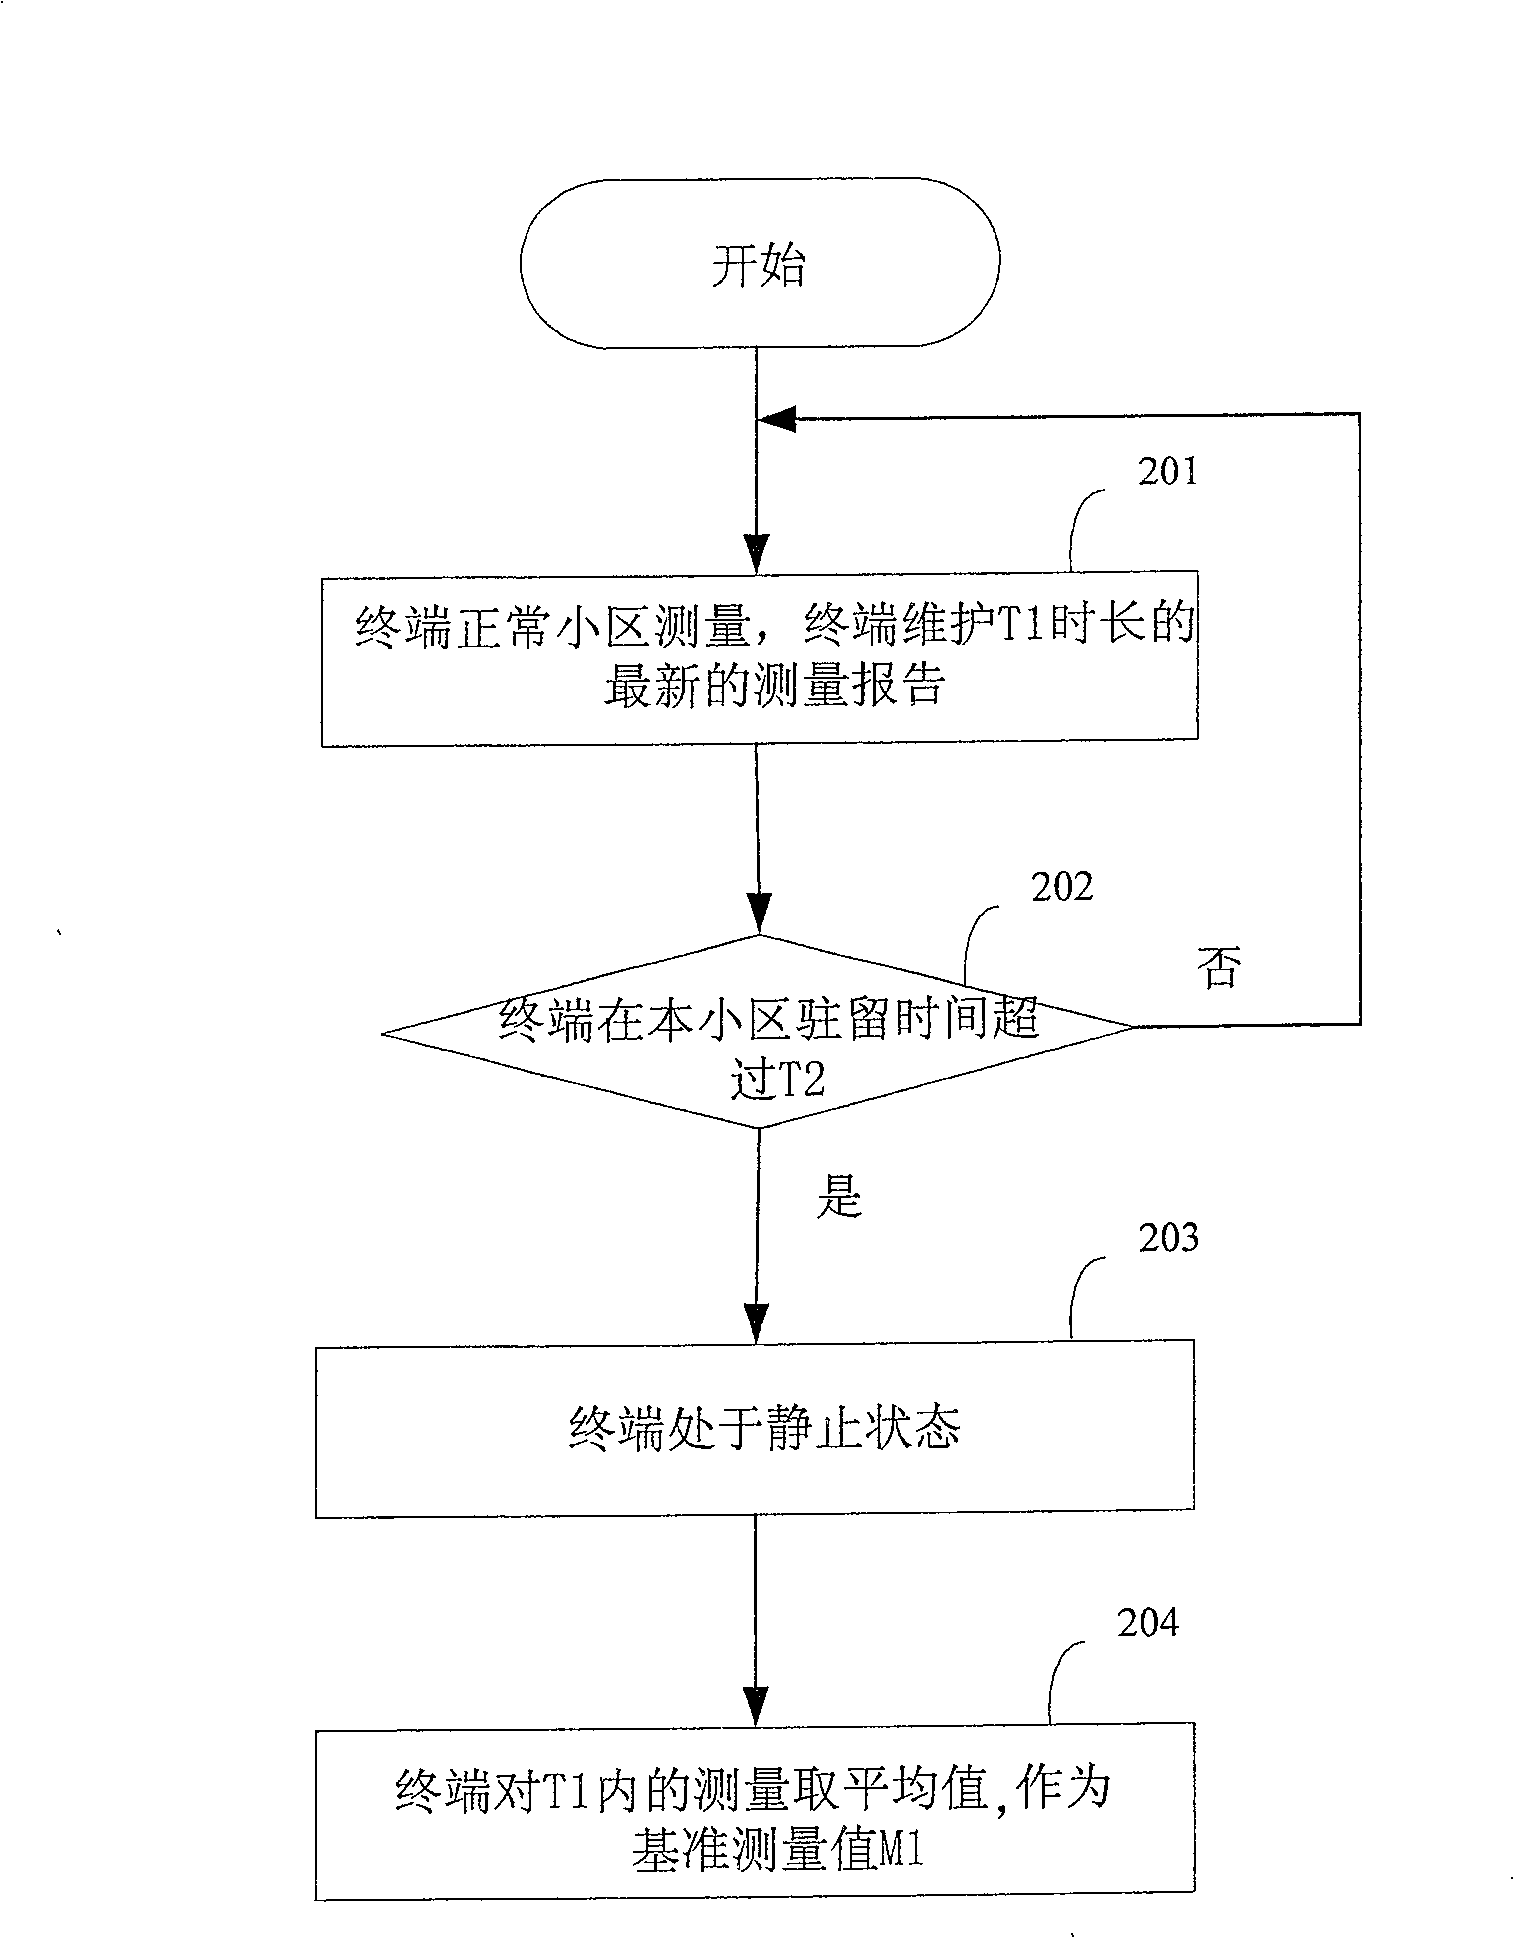 Method and apparatus for realizing electricity saving of mobile terminal